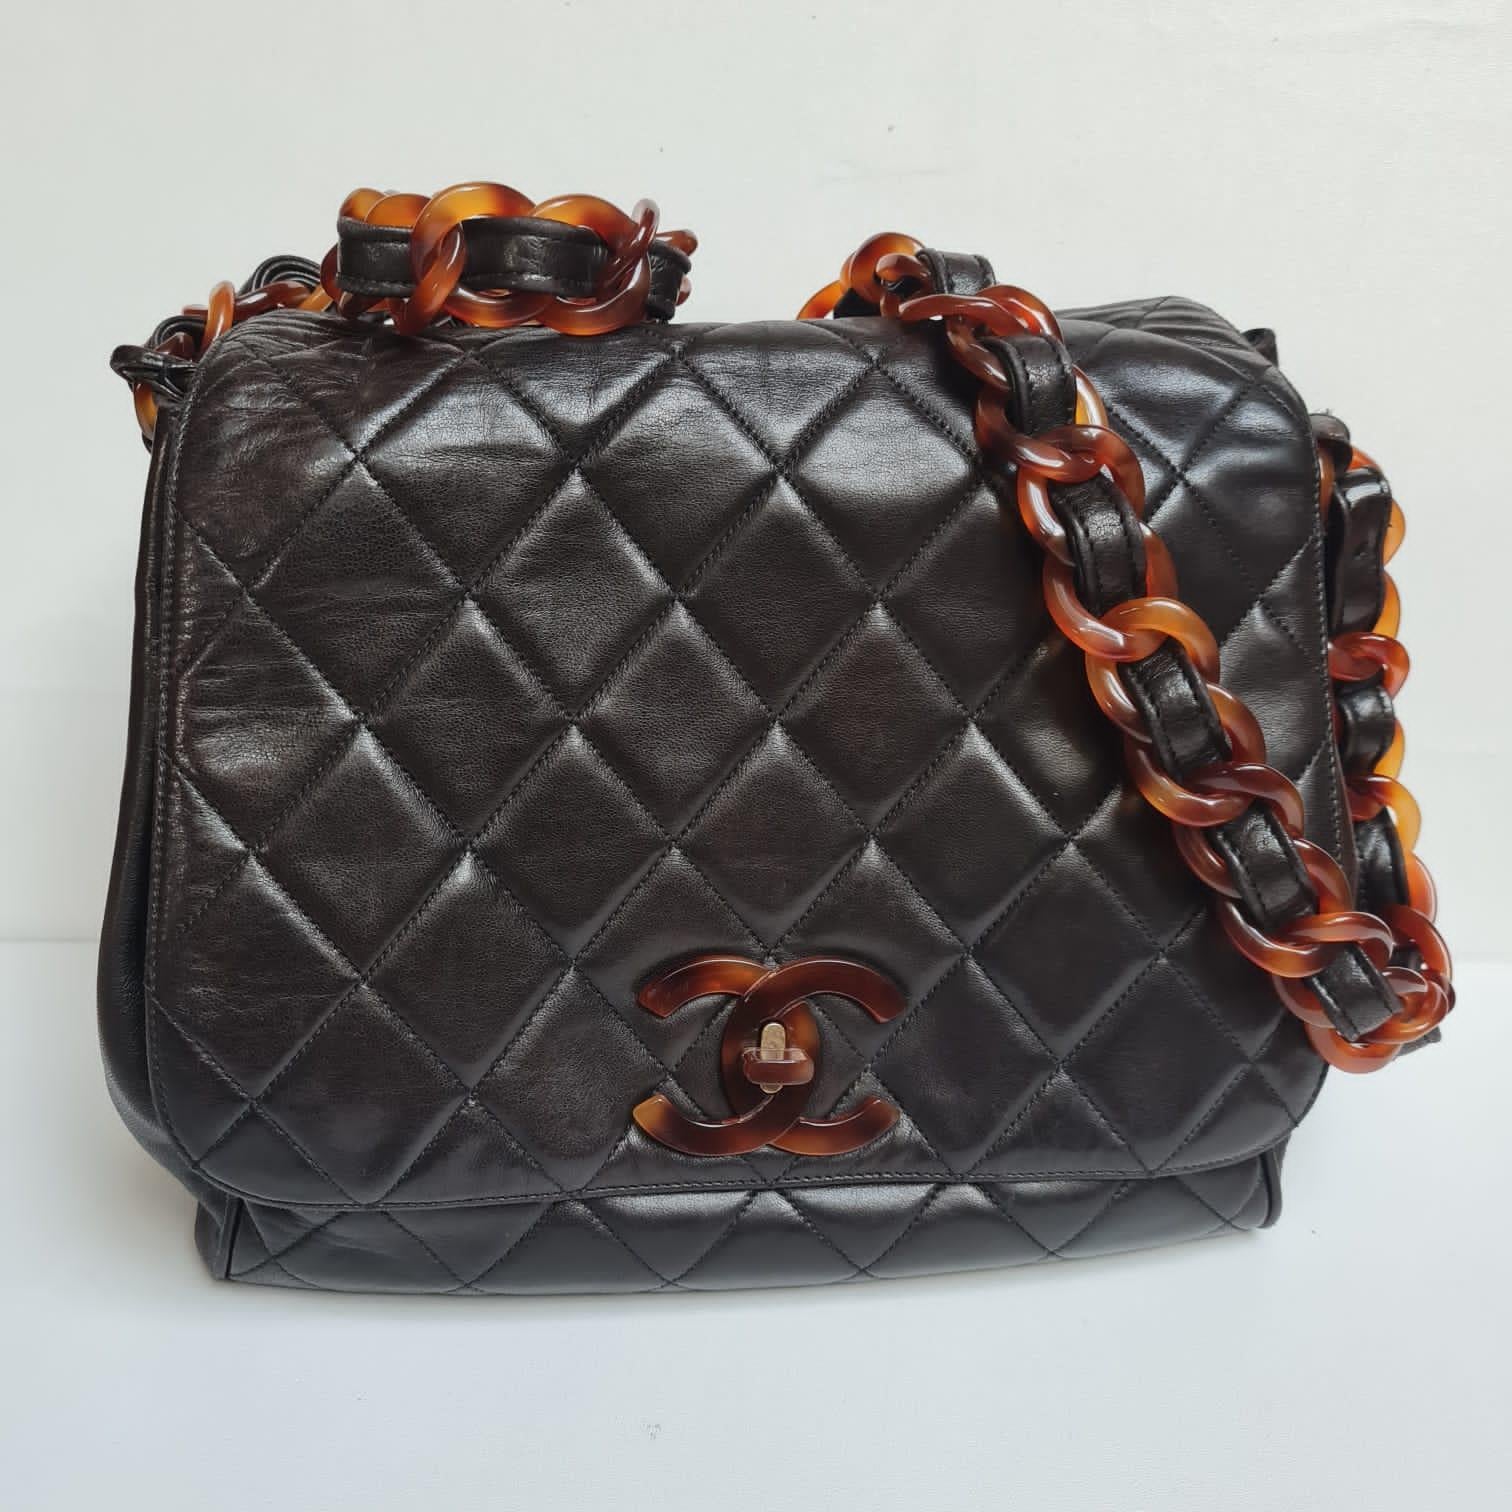 Rare Vintage 1990s Chanel Black Quilted Tortoiseshell Round Flap Bag For Sale 4